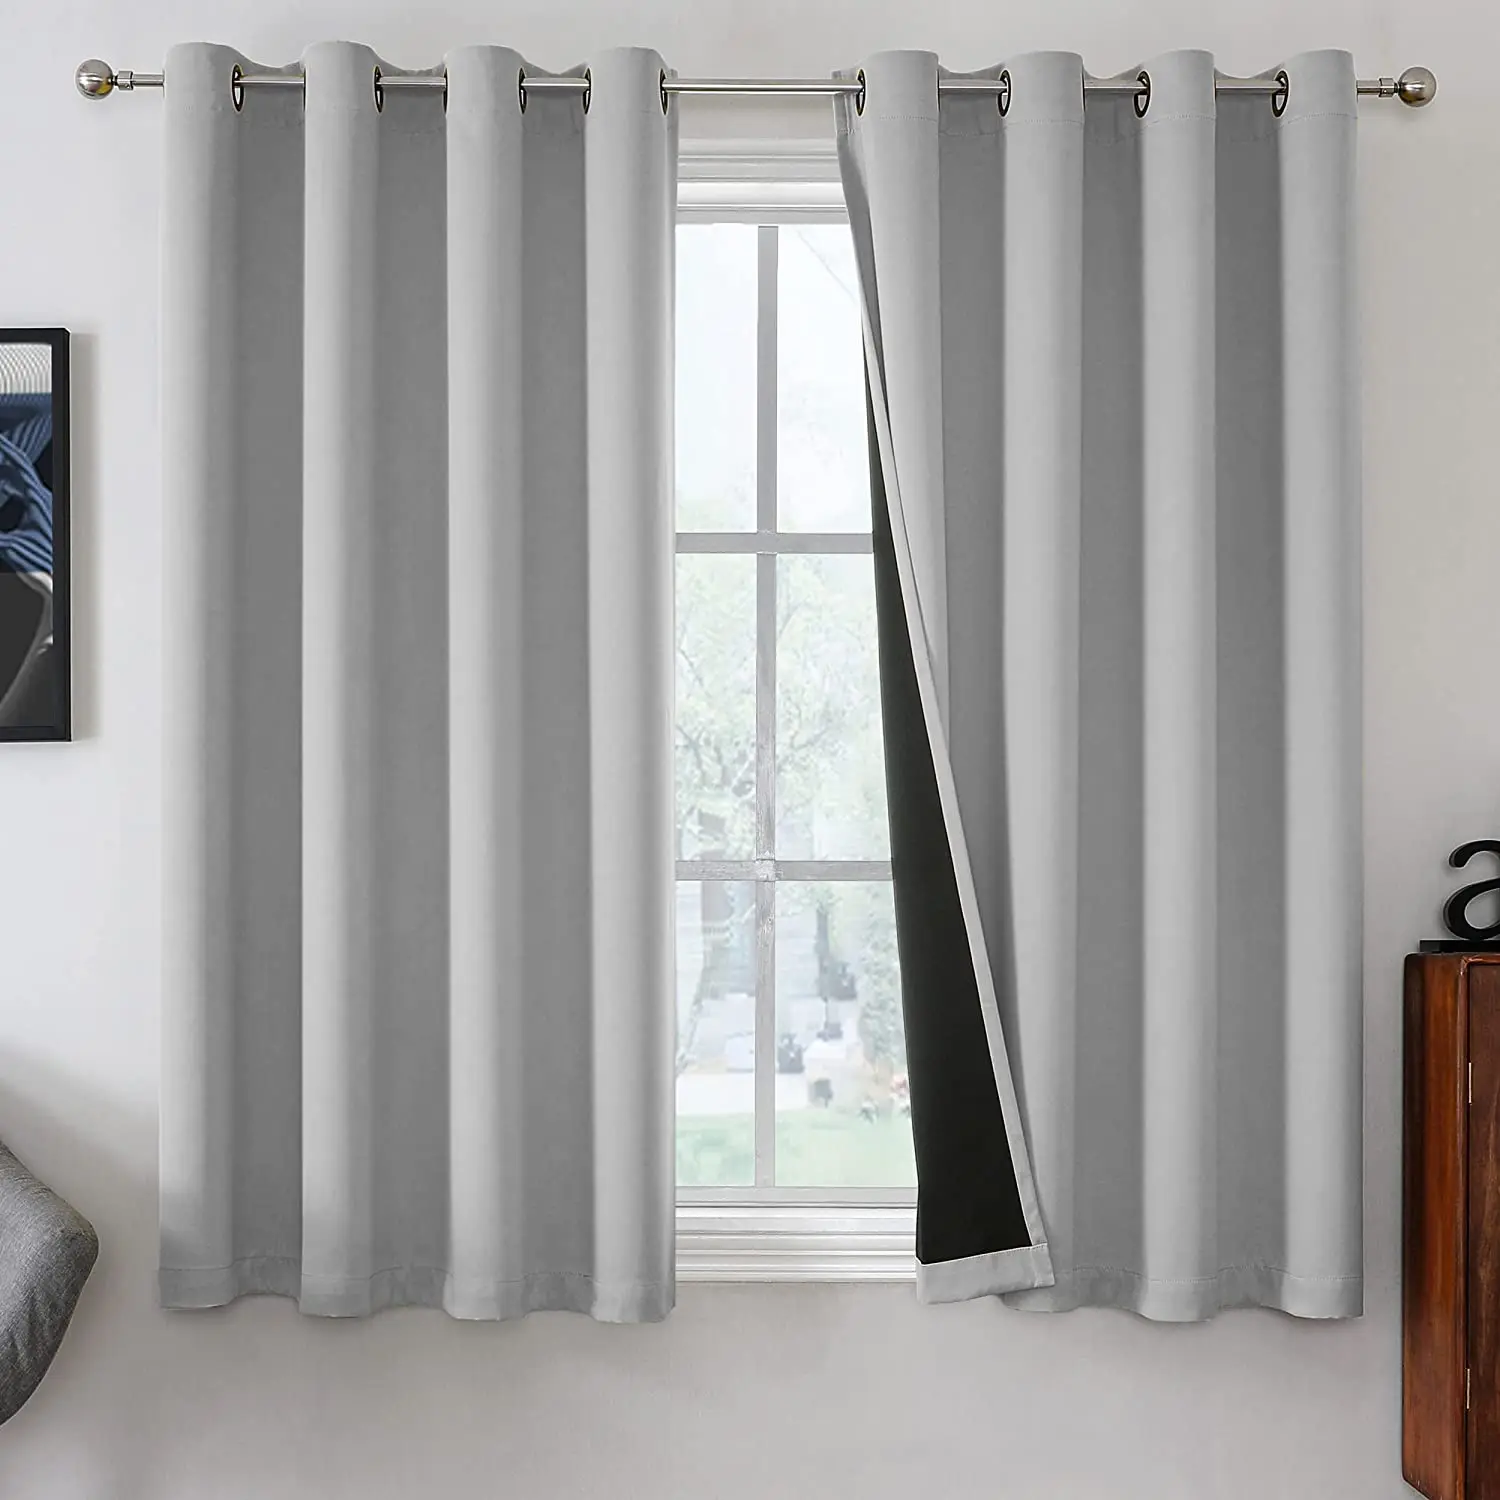 Curtains for the living room luxury Blackout Curtain Panels , Heat and Full Light Blocking Drapes with Grommets curtains